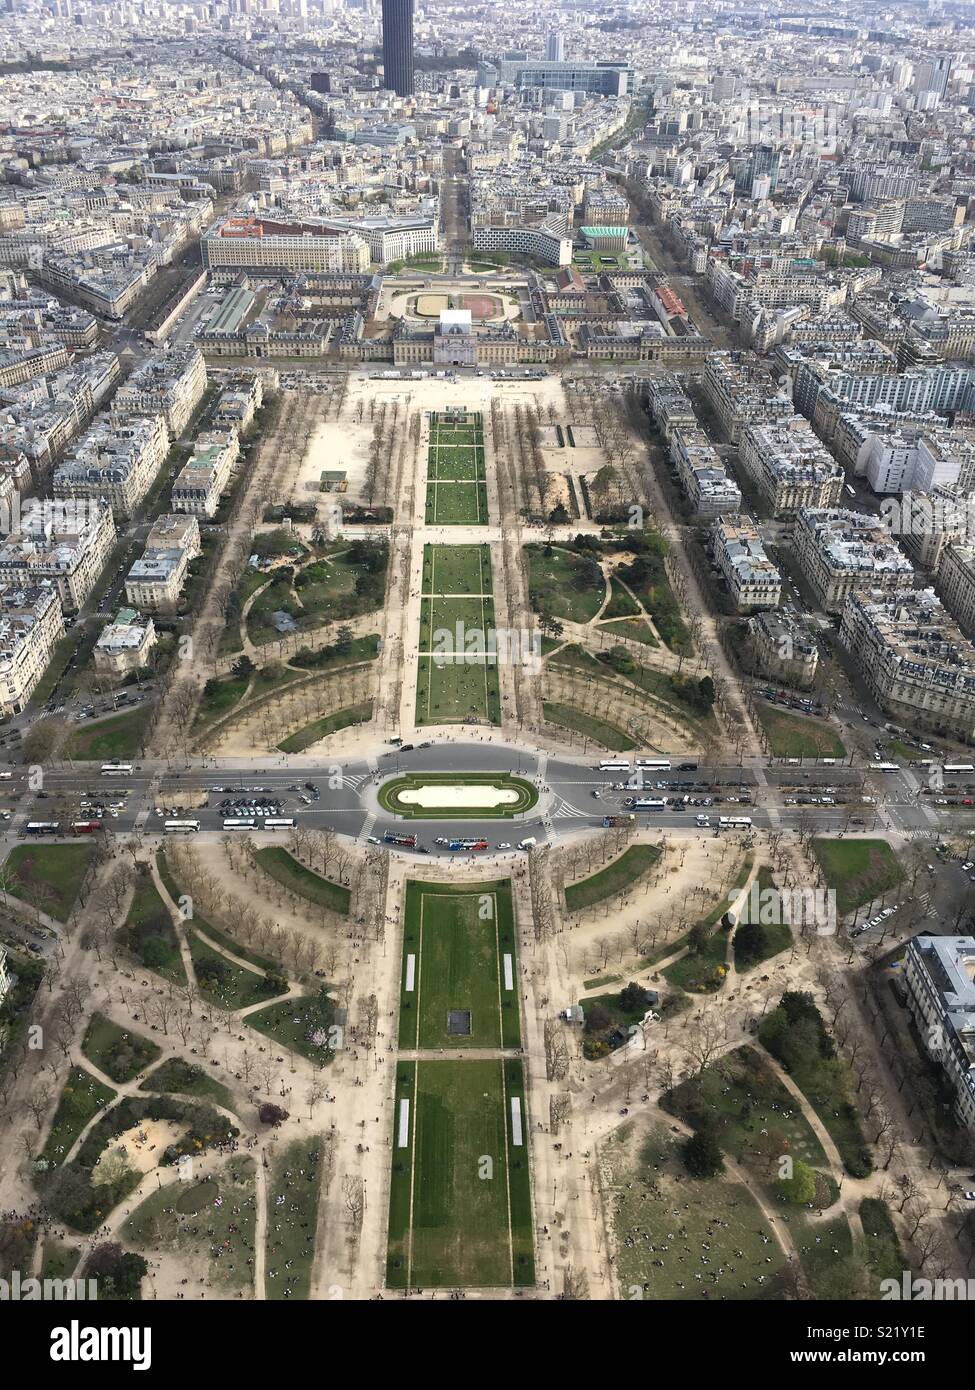 View From The Top Of The Eiffel Tower High Resolution Stock Photography and  Images - Alamy